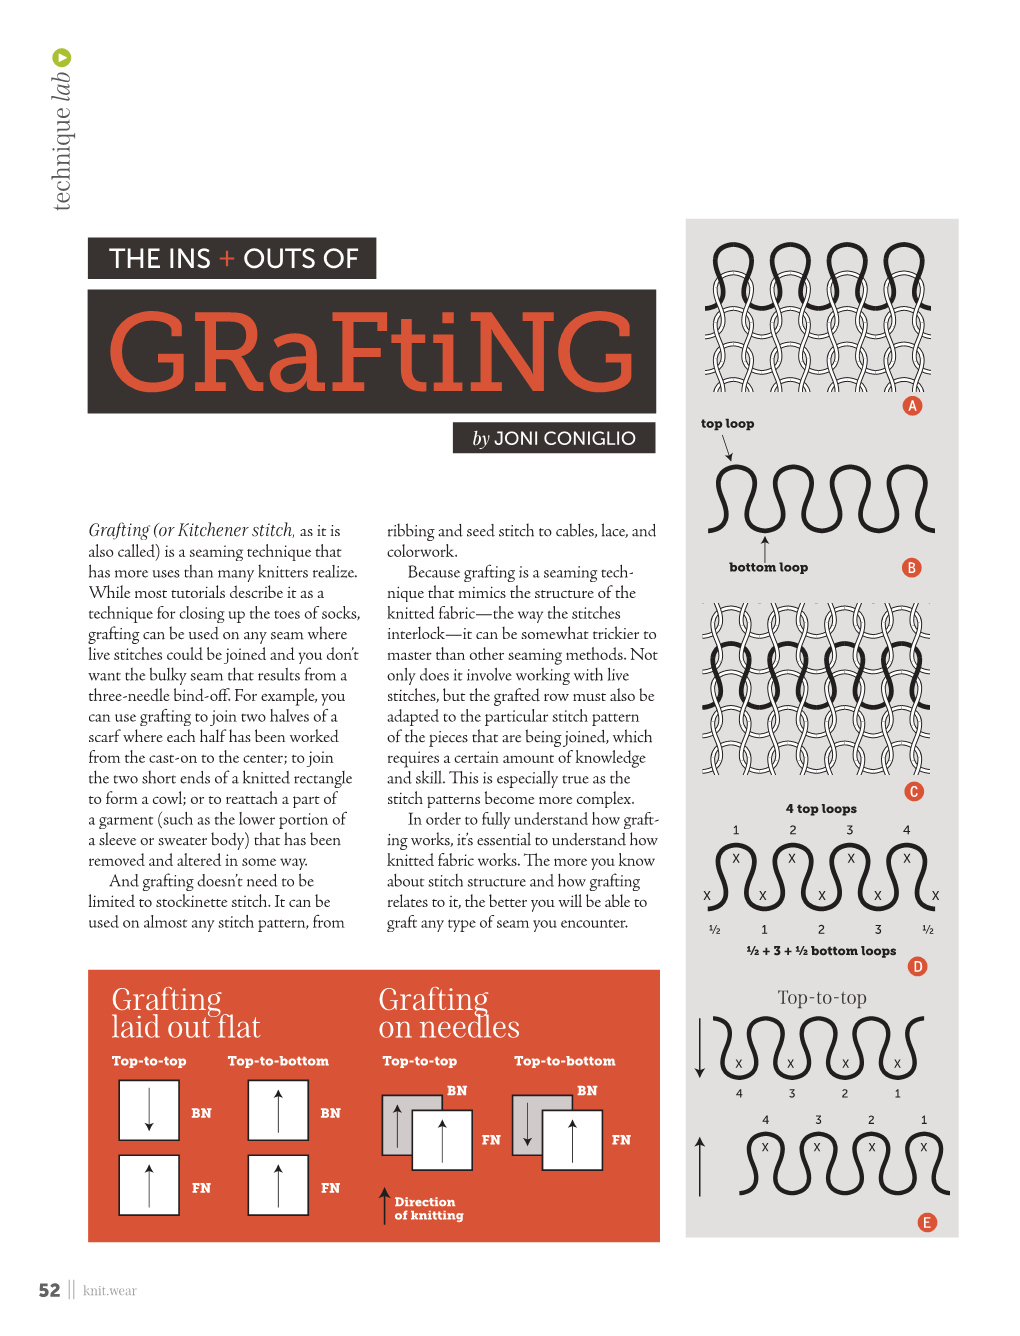 Grafting a Top Loop by Joni Coniglio